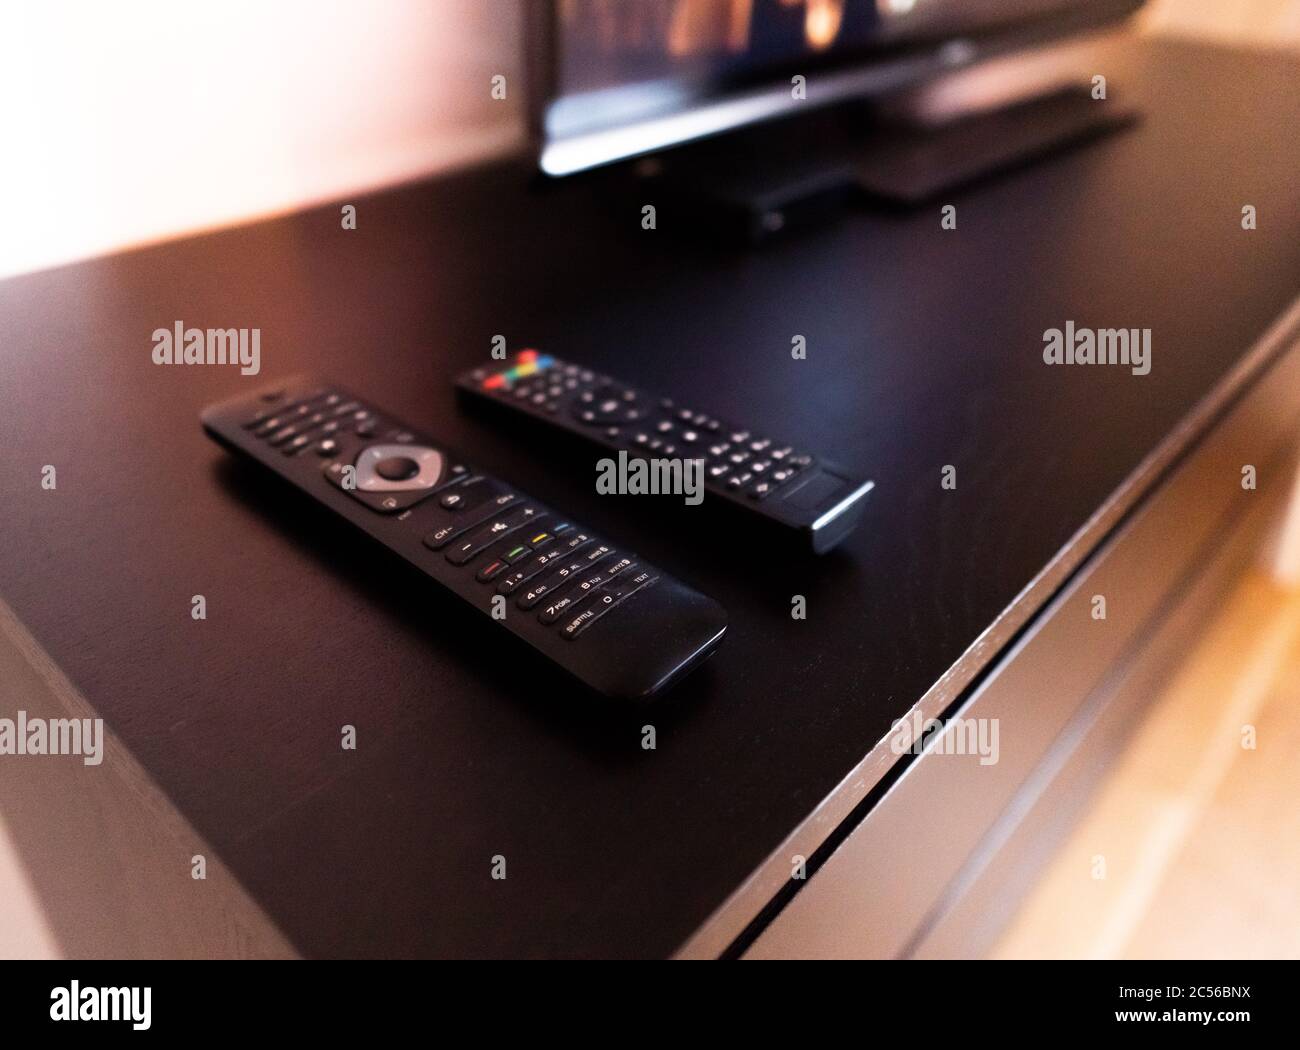 Smart Tv High Resolution Stock Photography and Images - Alamy